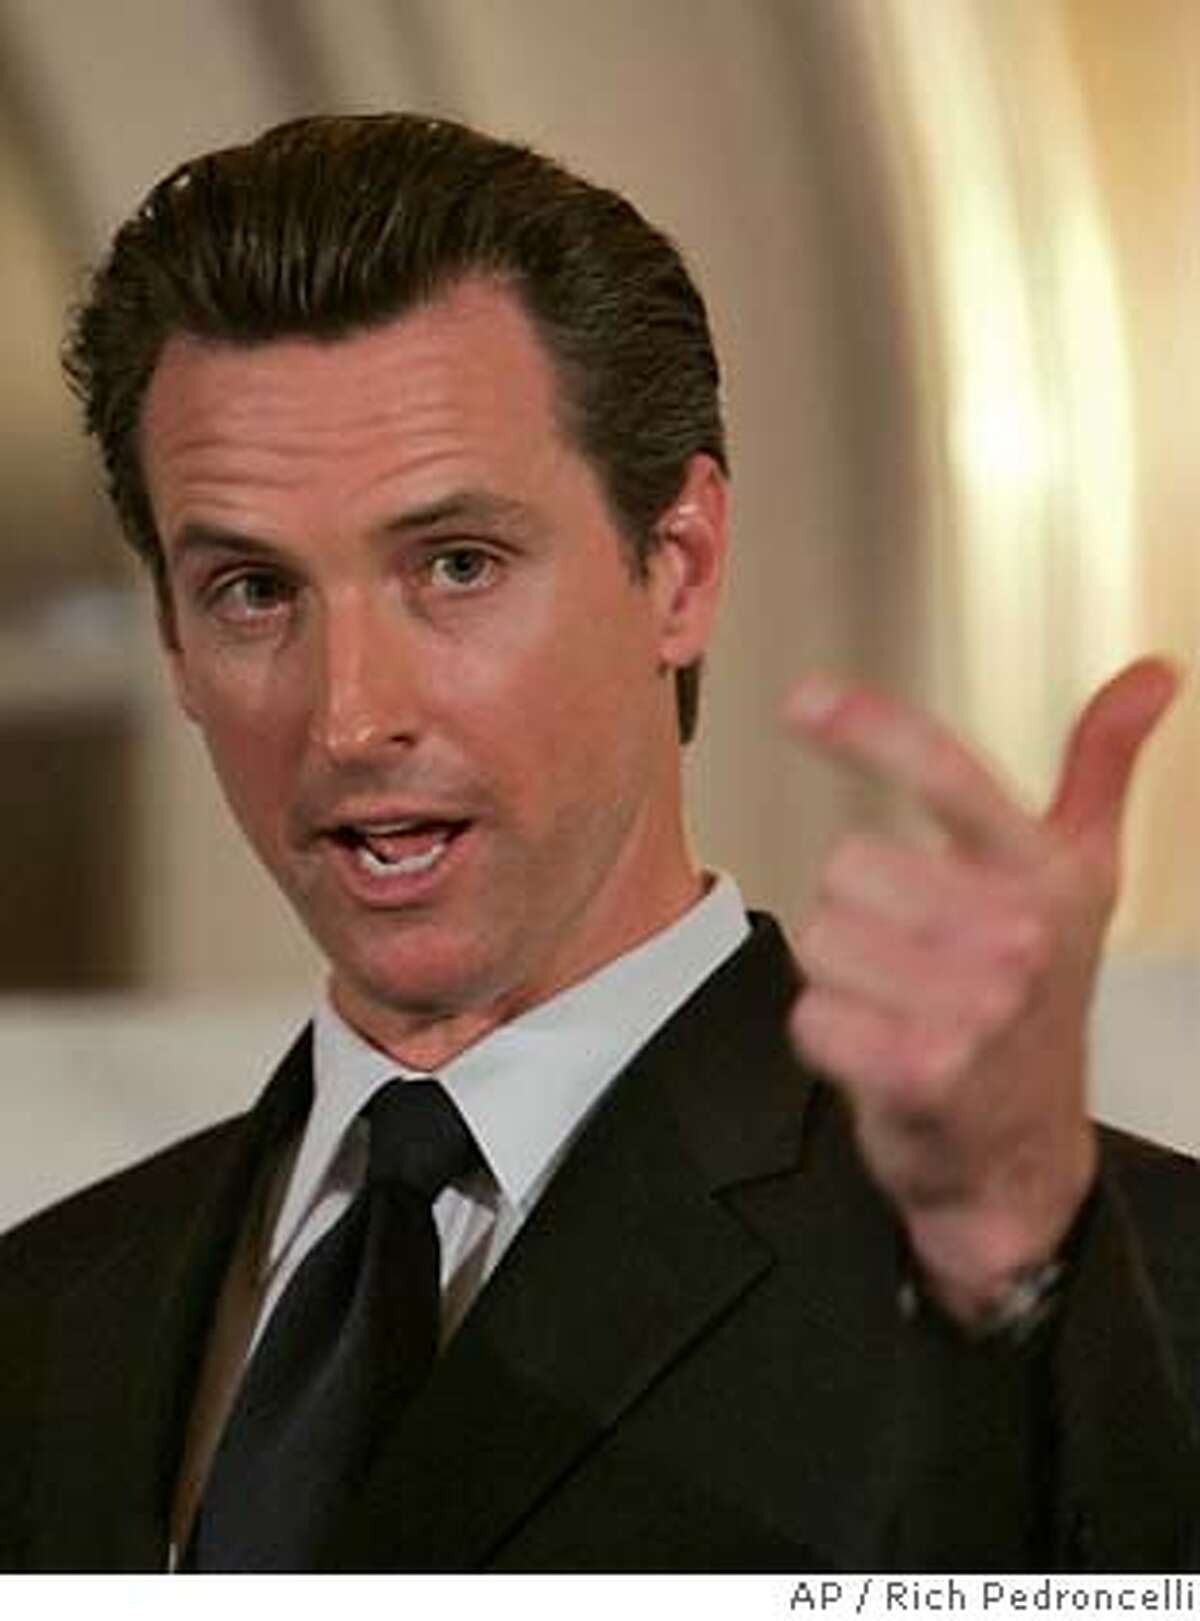 ###Live Caption:San Francisco Mayor Gavin Newsom gestures as he addresses the Sacramento Press Club in Sacramento, Calif., Tuesday, March 25, 2008. Newsom is criticizing deep cuts to California's Medi-Cal program and says he is considering a lawsuit to reinstate some of the funding. (AP Photo/Rich Pedroncelli)###Caption History:San Francisco Mayor Gavin Newsom gestures as he addresses the Sacramento Press Club in Sacramento, Calif., Tuesday, March 25, 2008. Newsom is criticizing deep cuts to California's Medi-Cal program and says he is considering a lawsuit to reinstate some of the funding. (AP Photo/Rich Pedroncelli) Ran on: 04-09-2008 Ran on: 04-09-2008 Ran on: 04-16-2008 Mayor Gavin Newsom thinks mandatory spending acts should have a known money source. Ran on: 04-16-2008 Mayor Gavin Newsom thinks mandatory spending acts should have a known money source. Ran on: 04-16-2008 Ran on: 04-16-2008 Ran on: 04-16-2008###Notes:Gavin Newsom###Special Instructions: